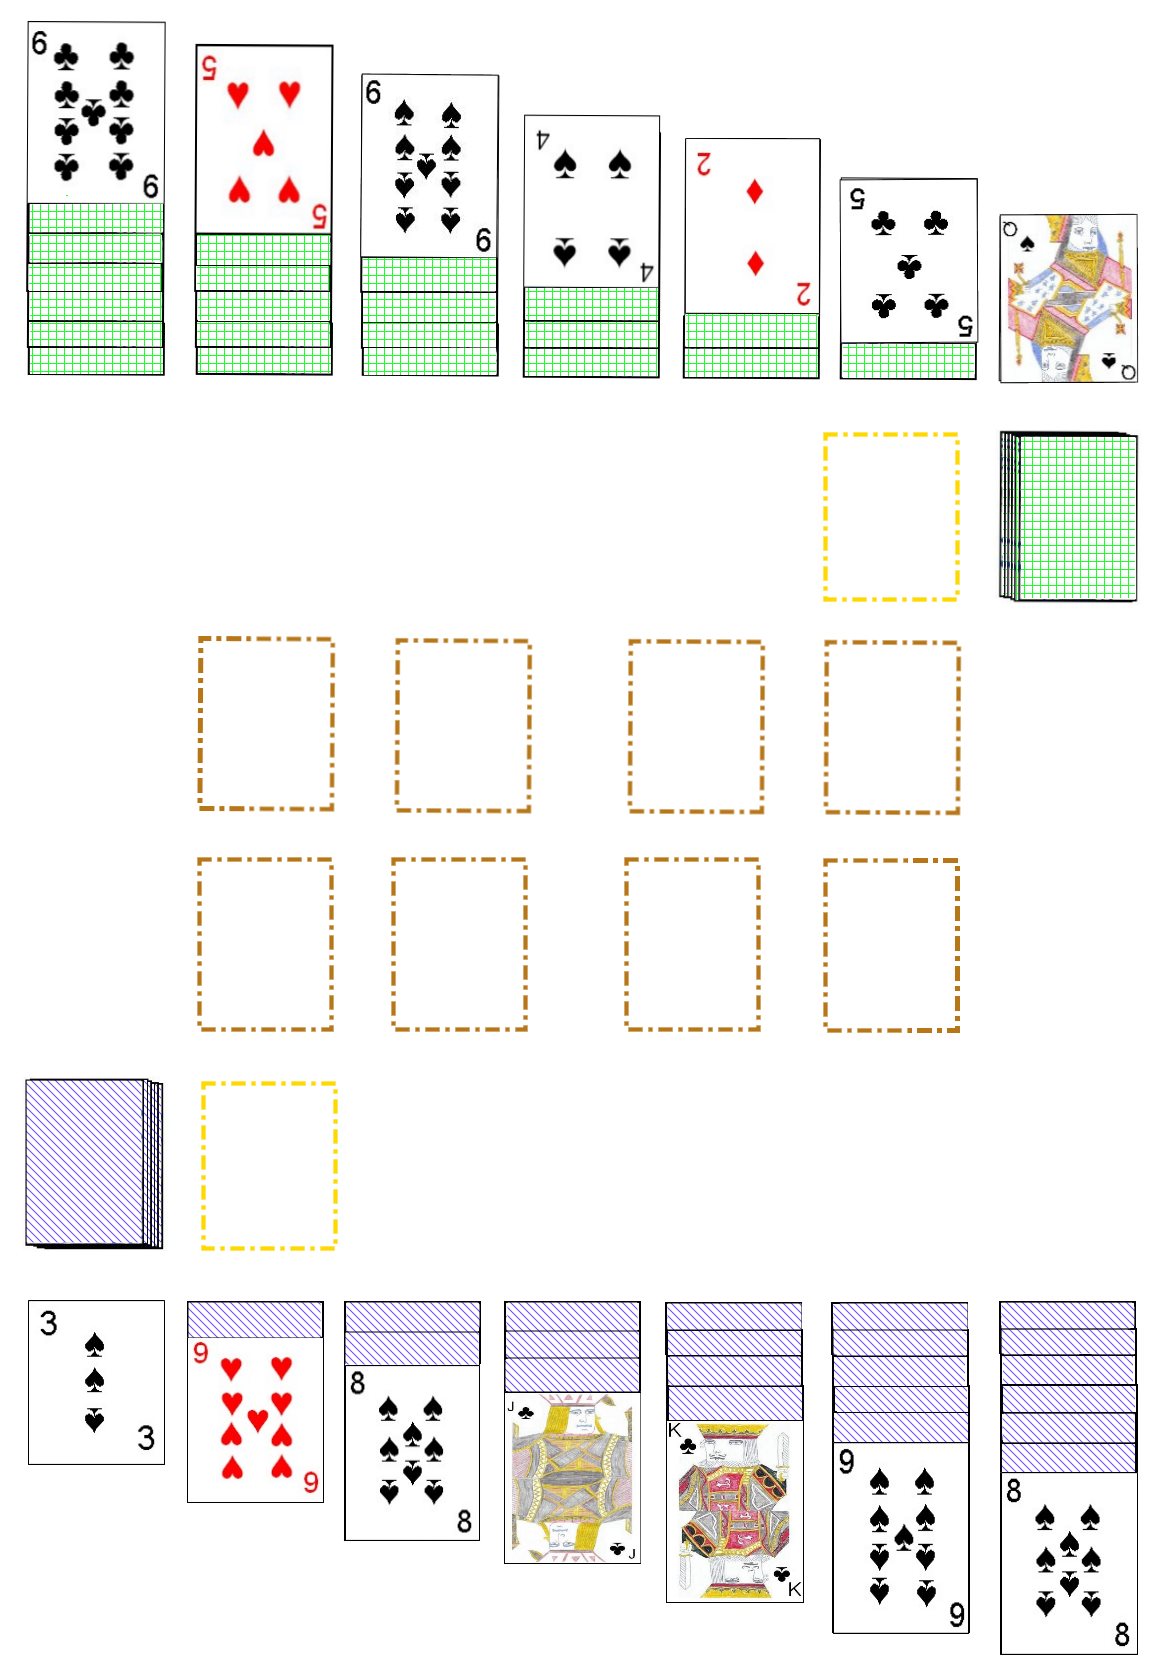 double klondike solitaire game